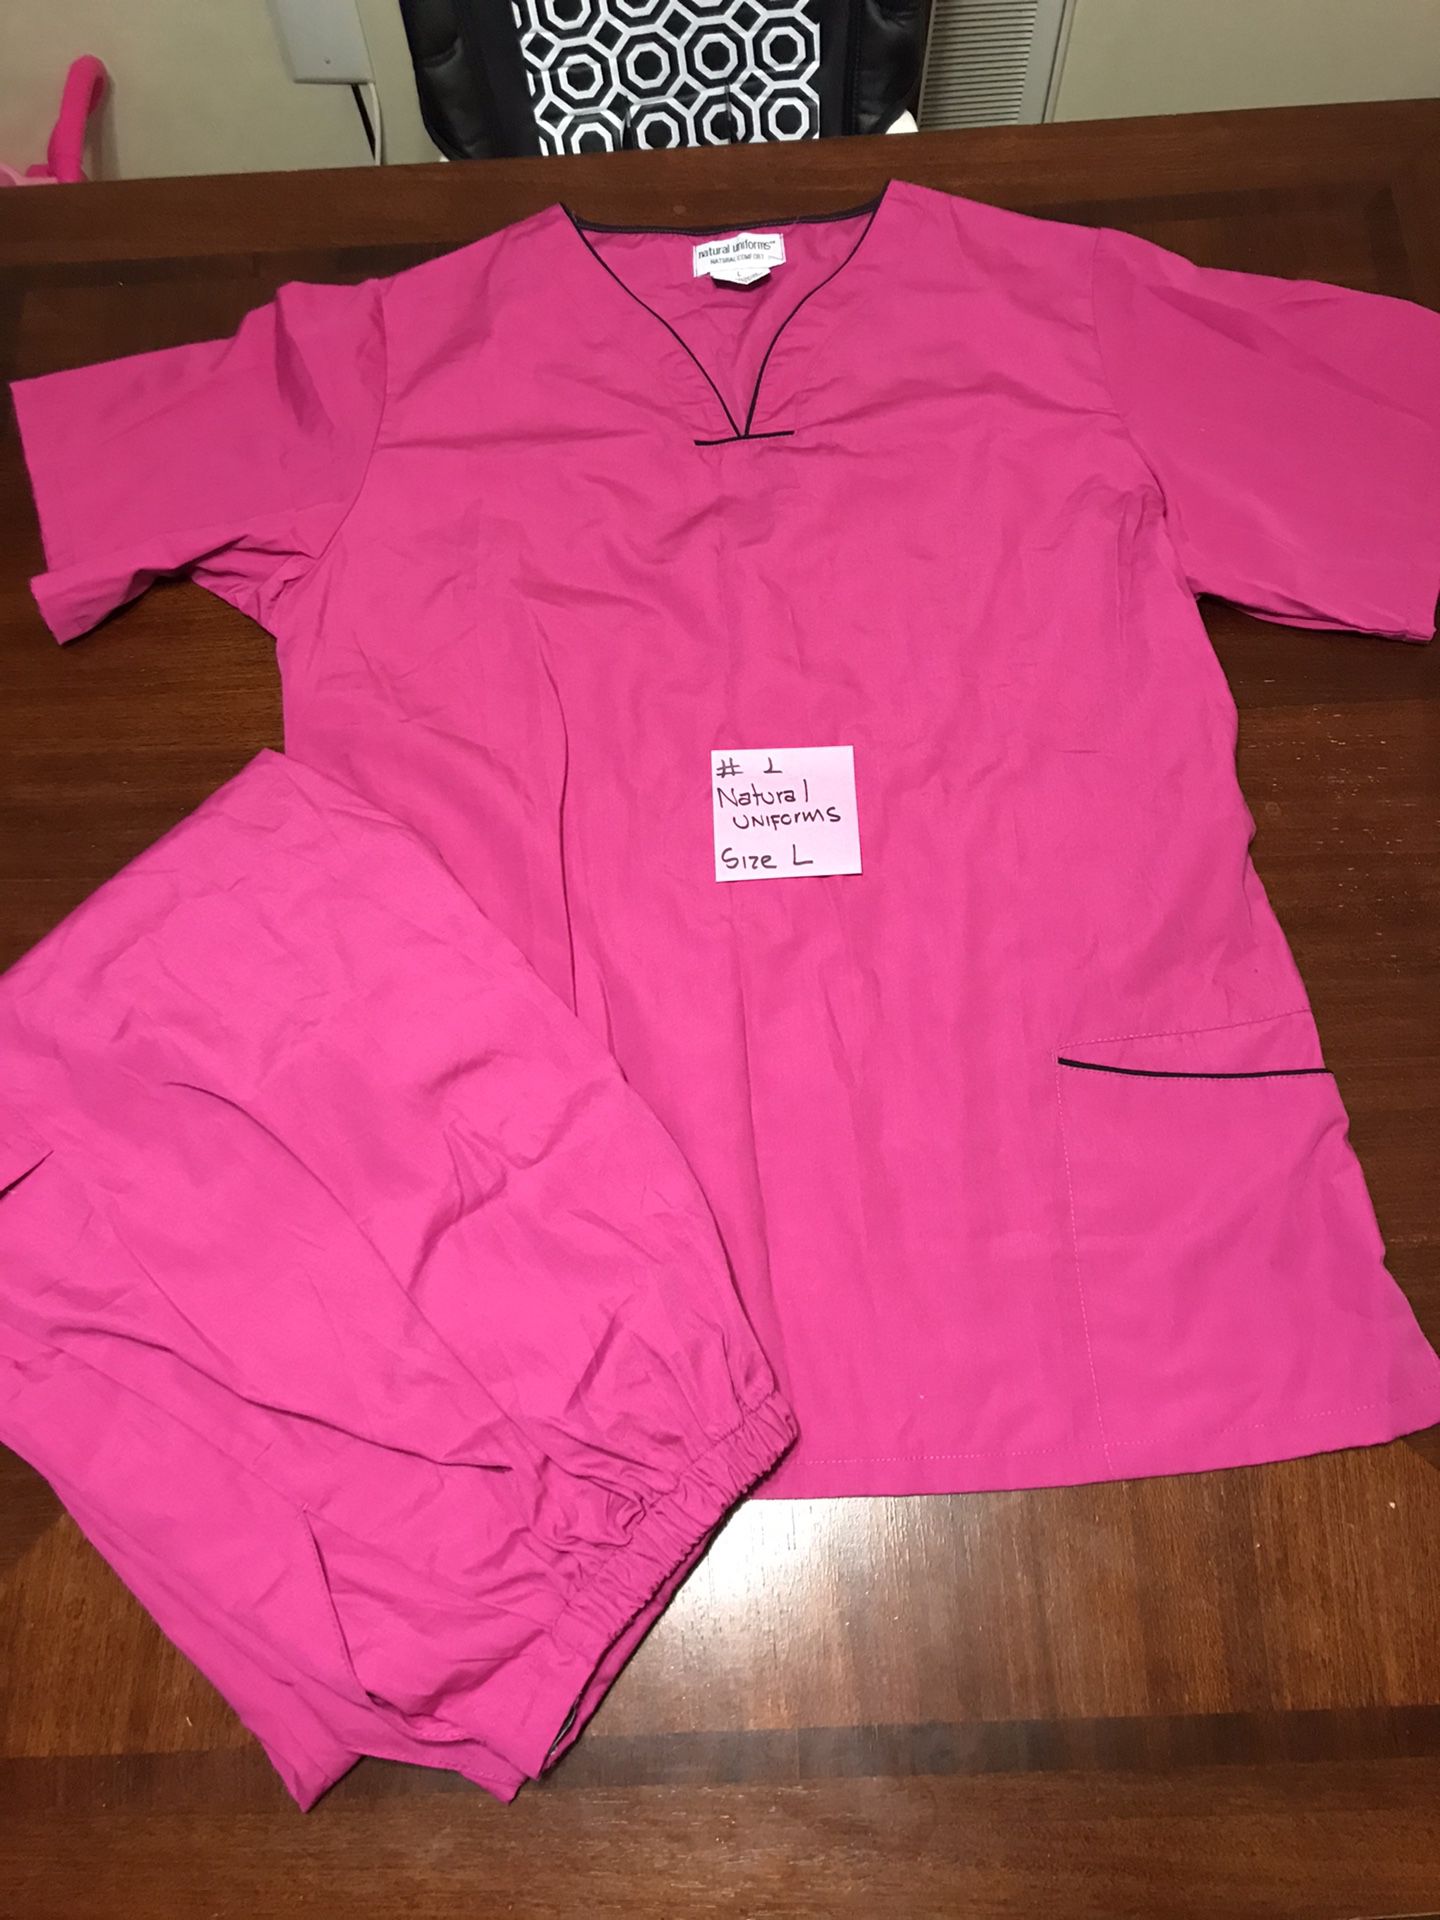 New and gently used medical scrubs